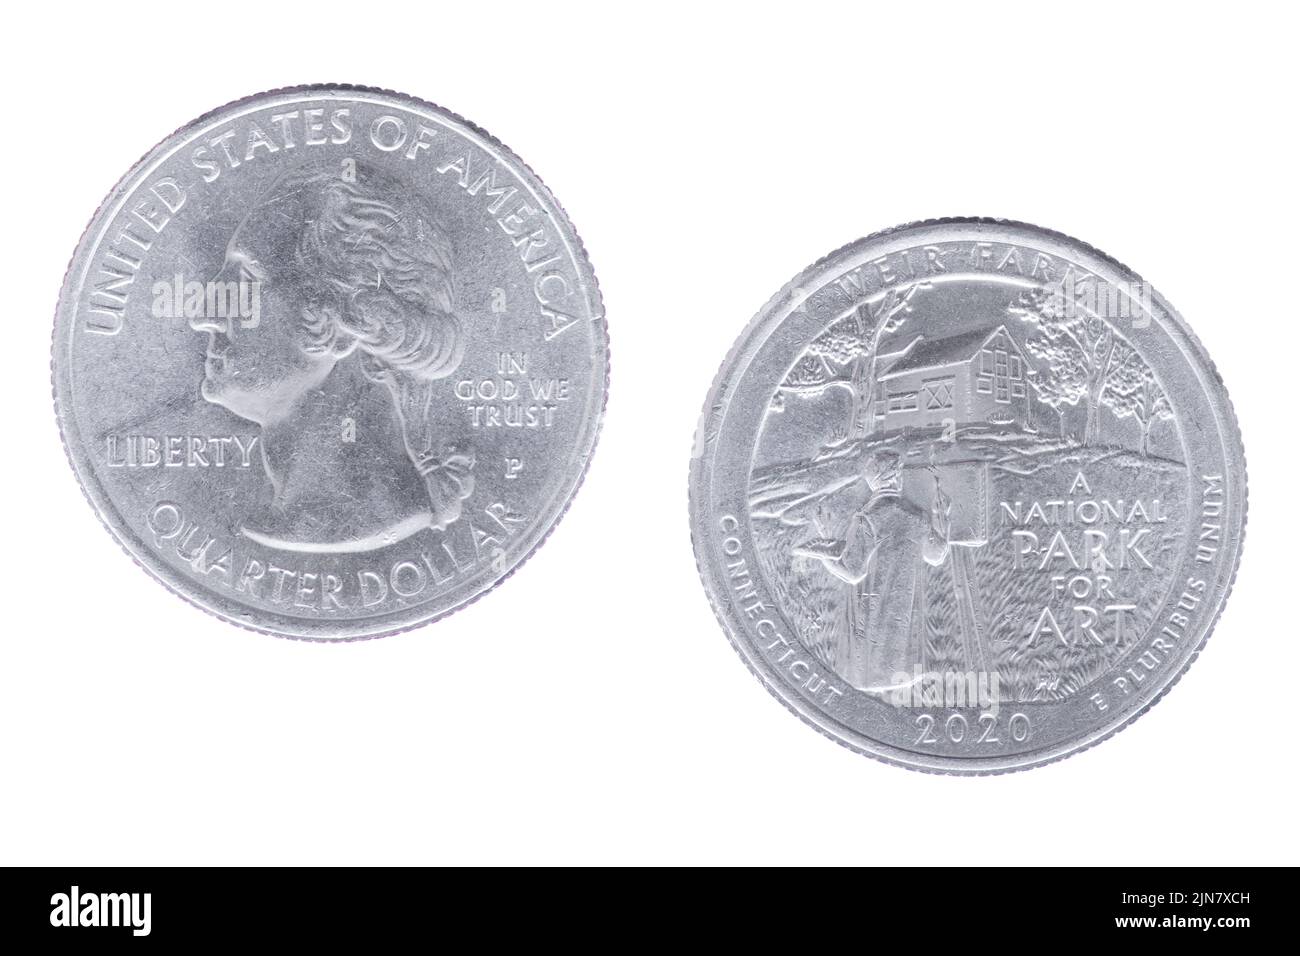 Obverse and reverse sides of the Weir Farm National Historic Park 2020P Commemorative Quarter, part of the America the Beautiful Commemorative Quarter Stock Photo